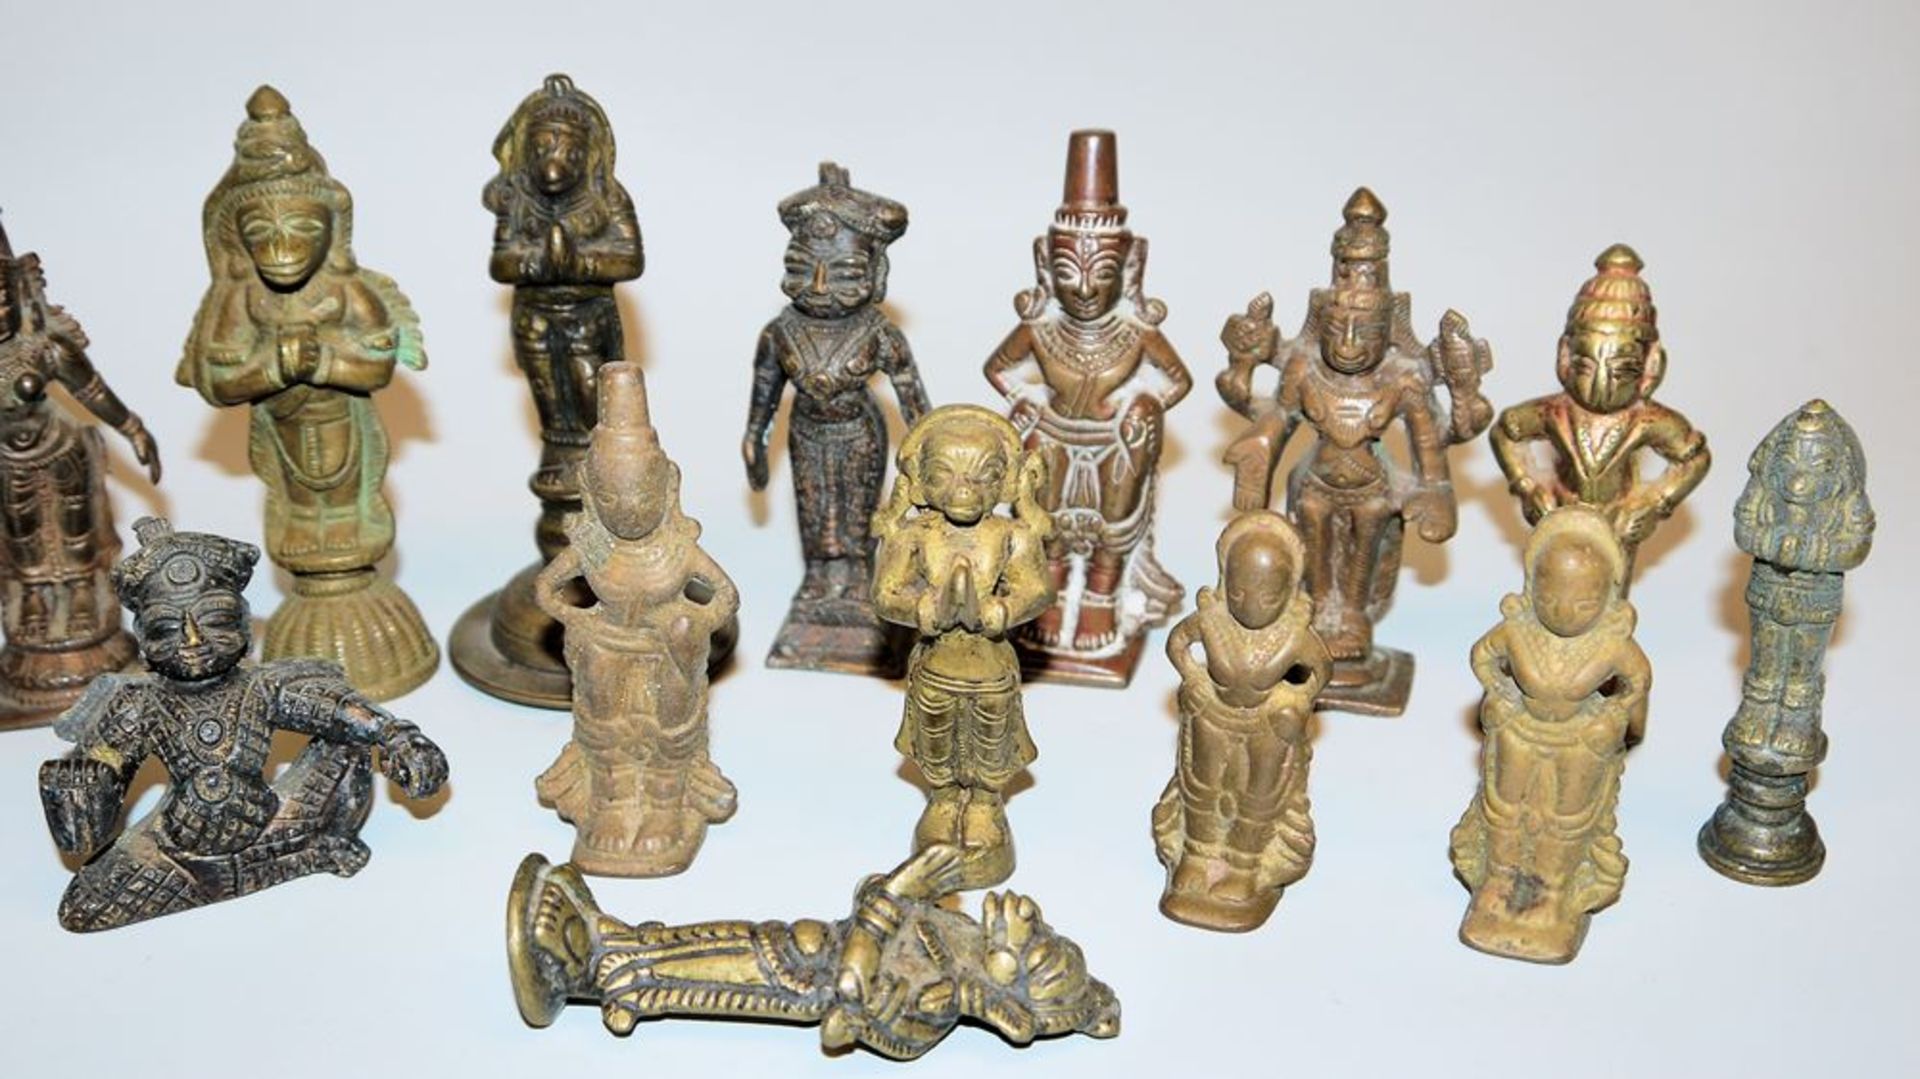 22 small bronzes of Hindu folk and high deities, India, 19th & 20th c. - Image 3 of 3